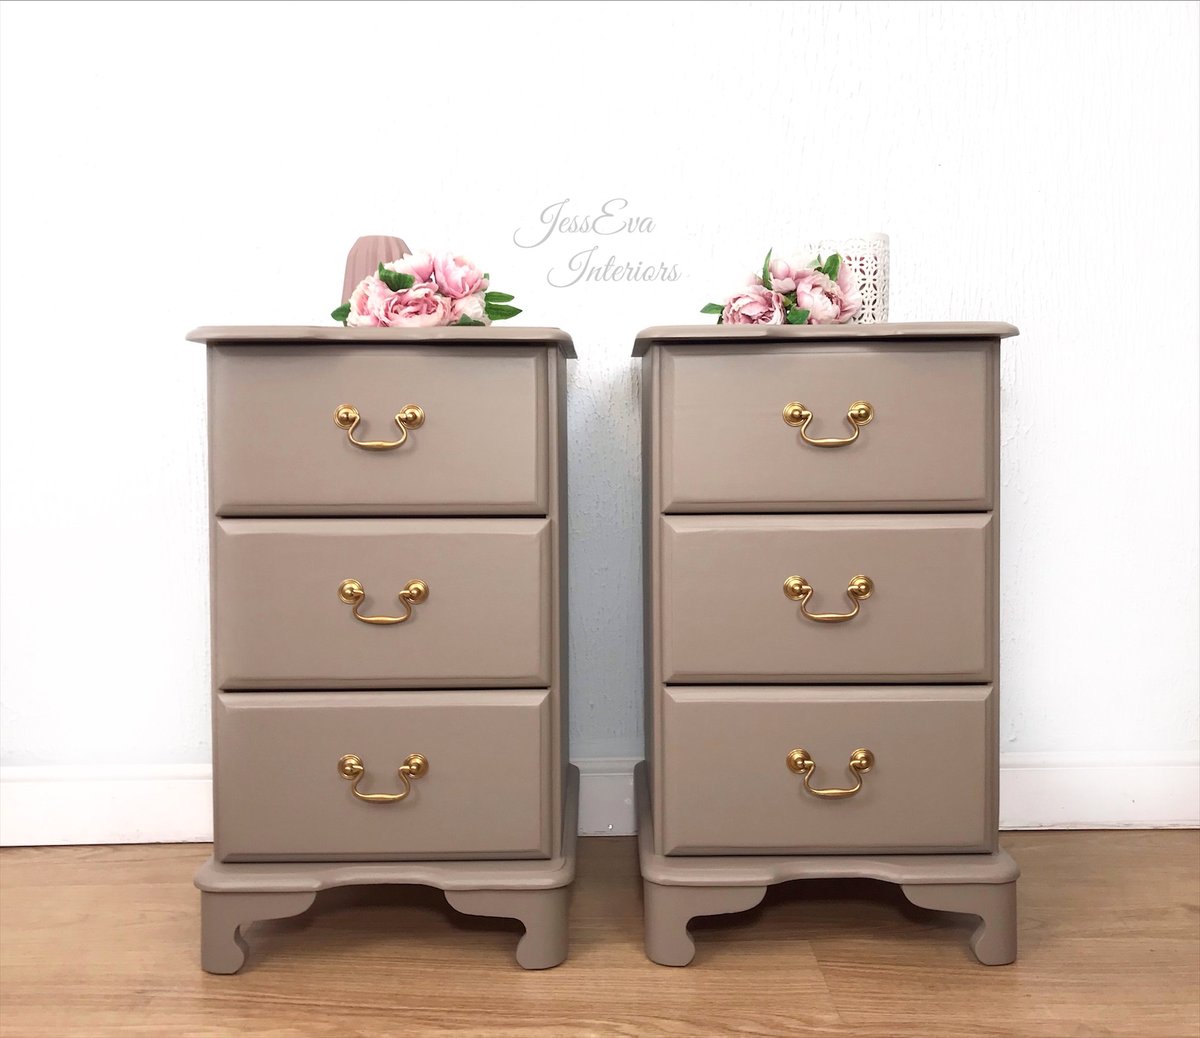 Pair of BEDSIDE TABLES / BEDSIDE DRAWERS / BEDSIDE CABINETS painted in neutral Taupe.